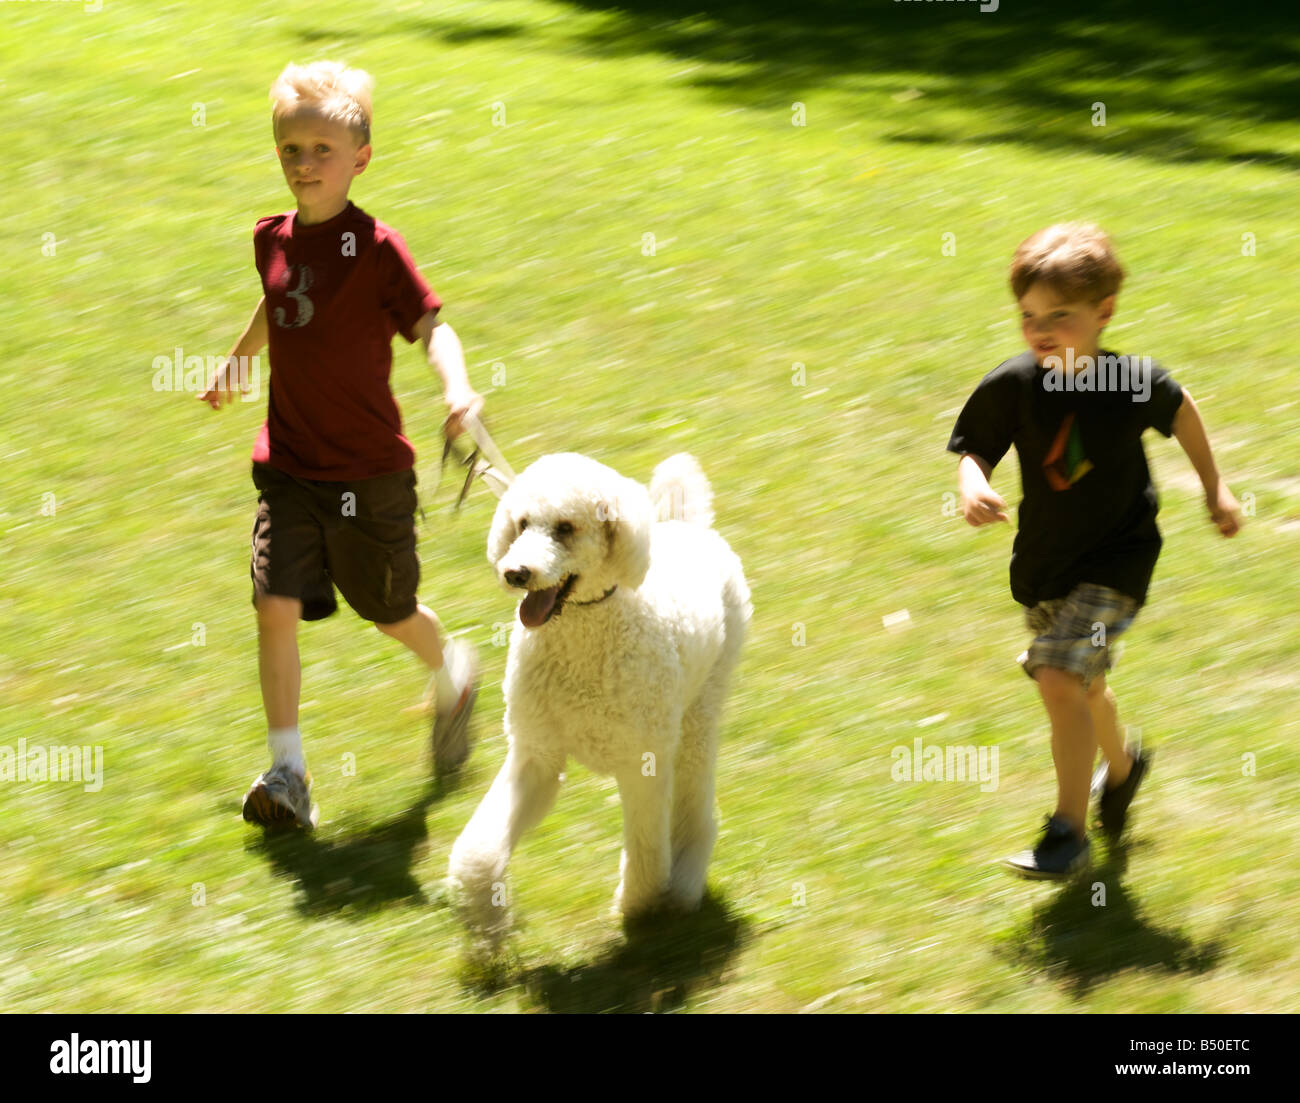 Standard poodle runs with boys 5-7 years old Stock Photo